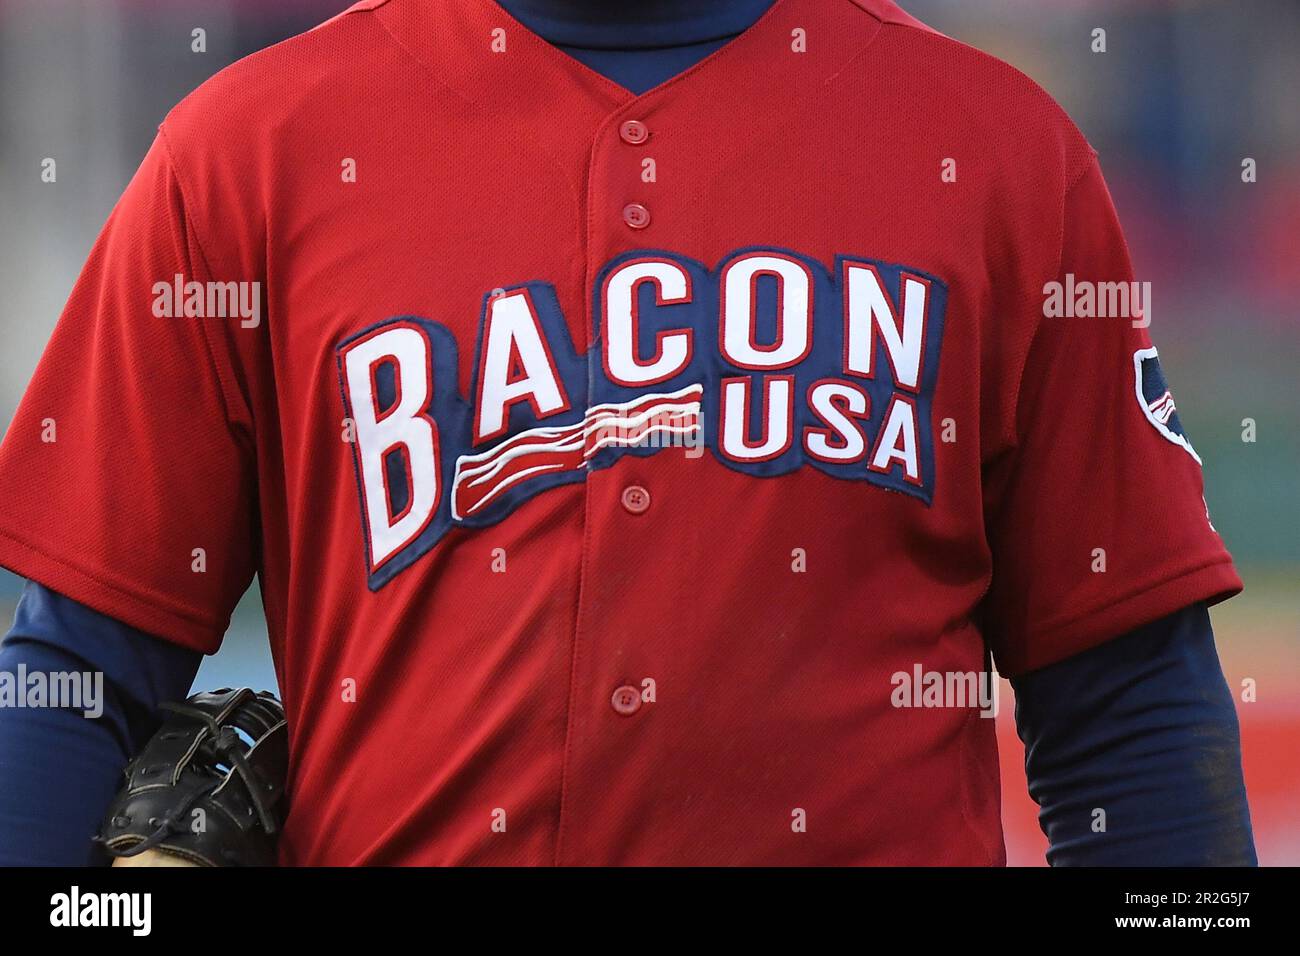 WORCESTER, MA - MAY 18: A detail view of the Bacon USA jersey worn by the  Lehigh Valley IronPigs during a AAA MiLB game between the Lehigh Valley  IronPigs and the Worcester